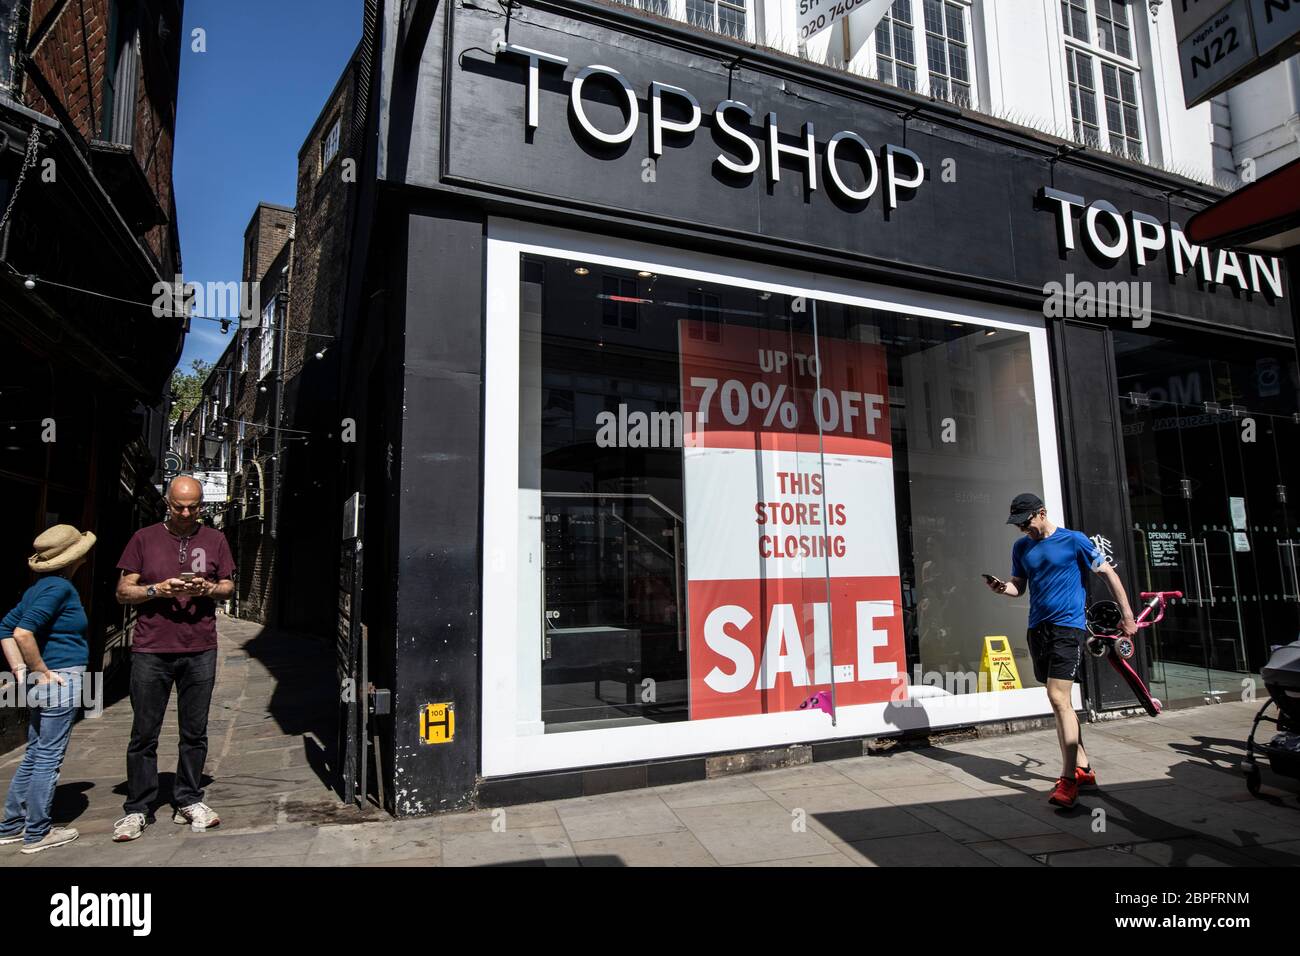 Topshop 70% closing down sale, high street clothing retail shop closing due to the effects of coronavirus COVID-19 pandemic across the UK Stock Photo